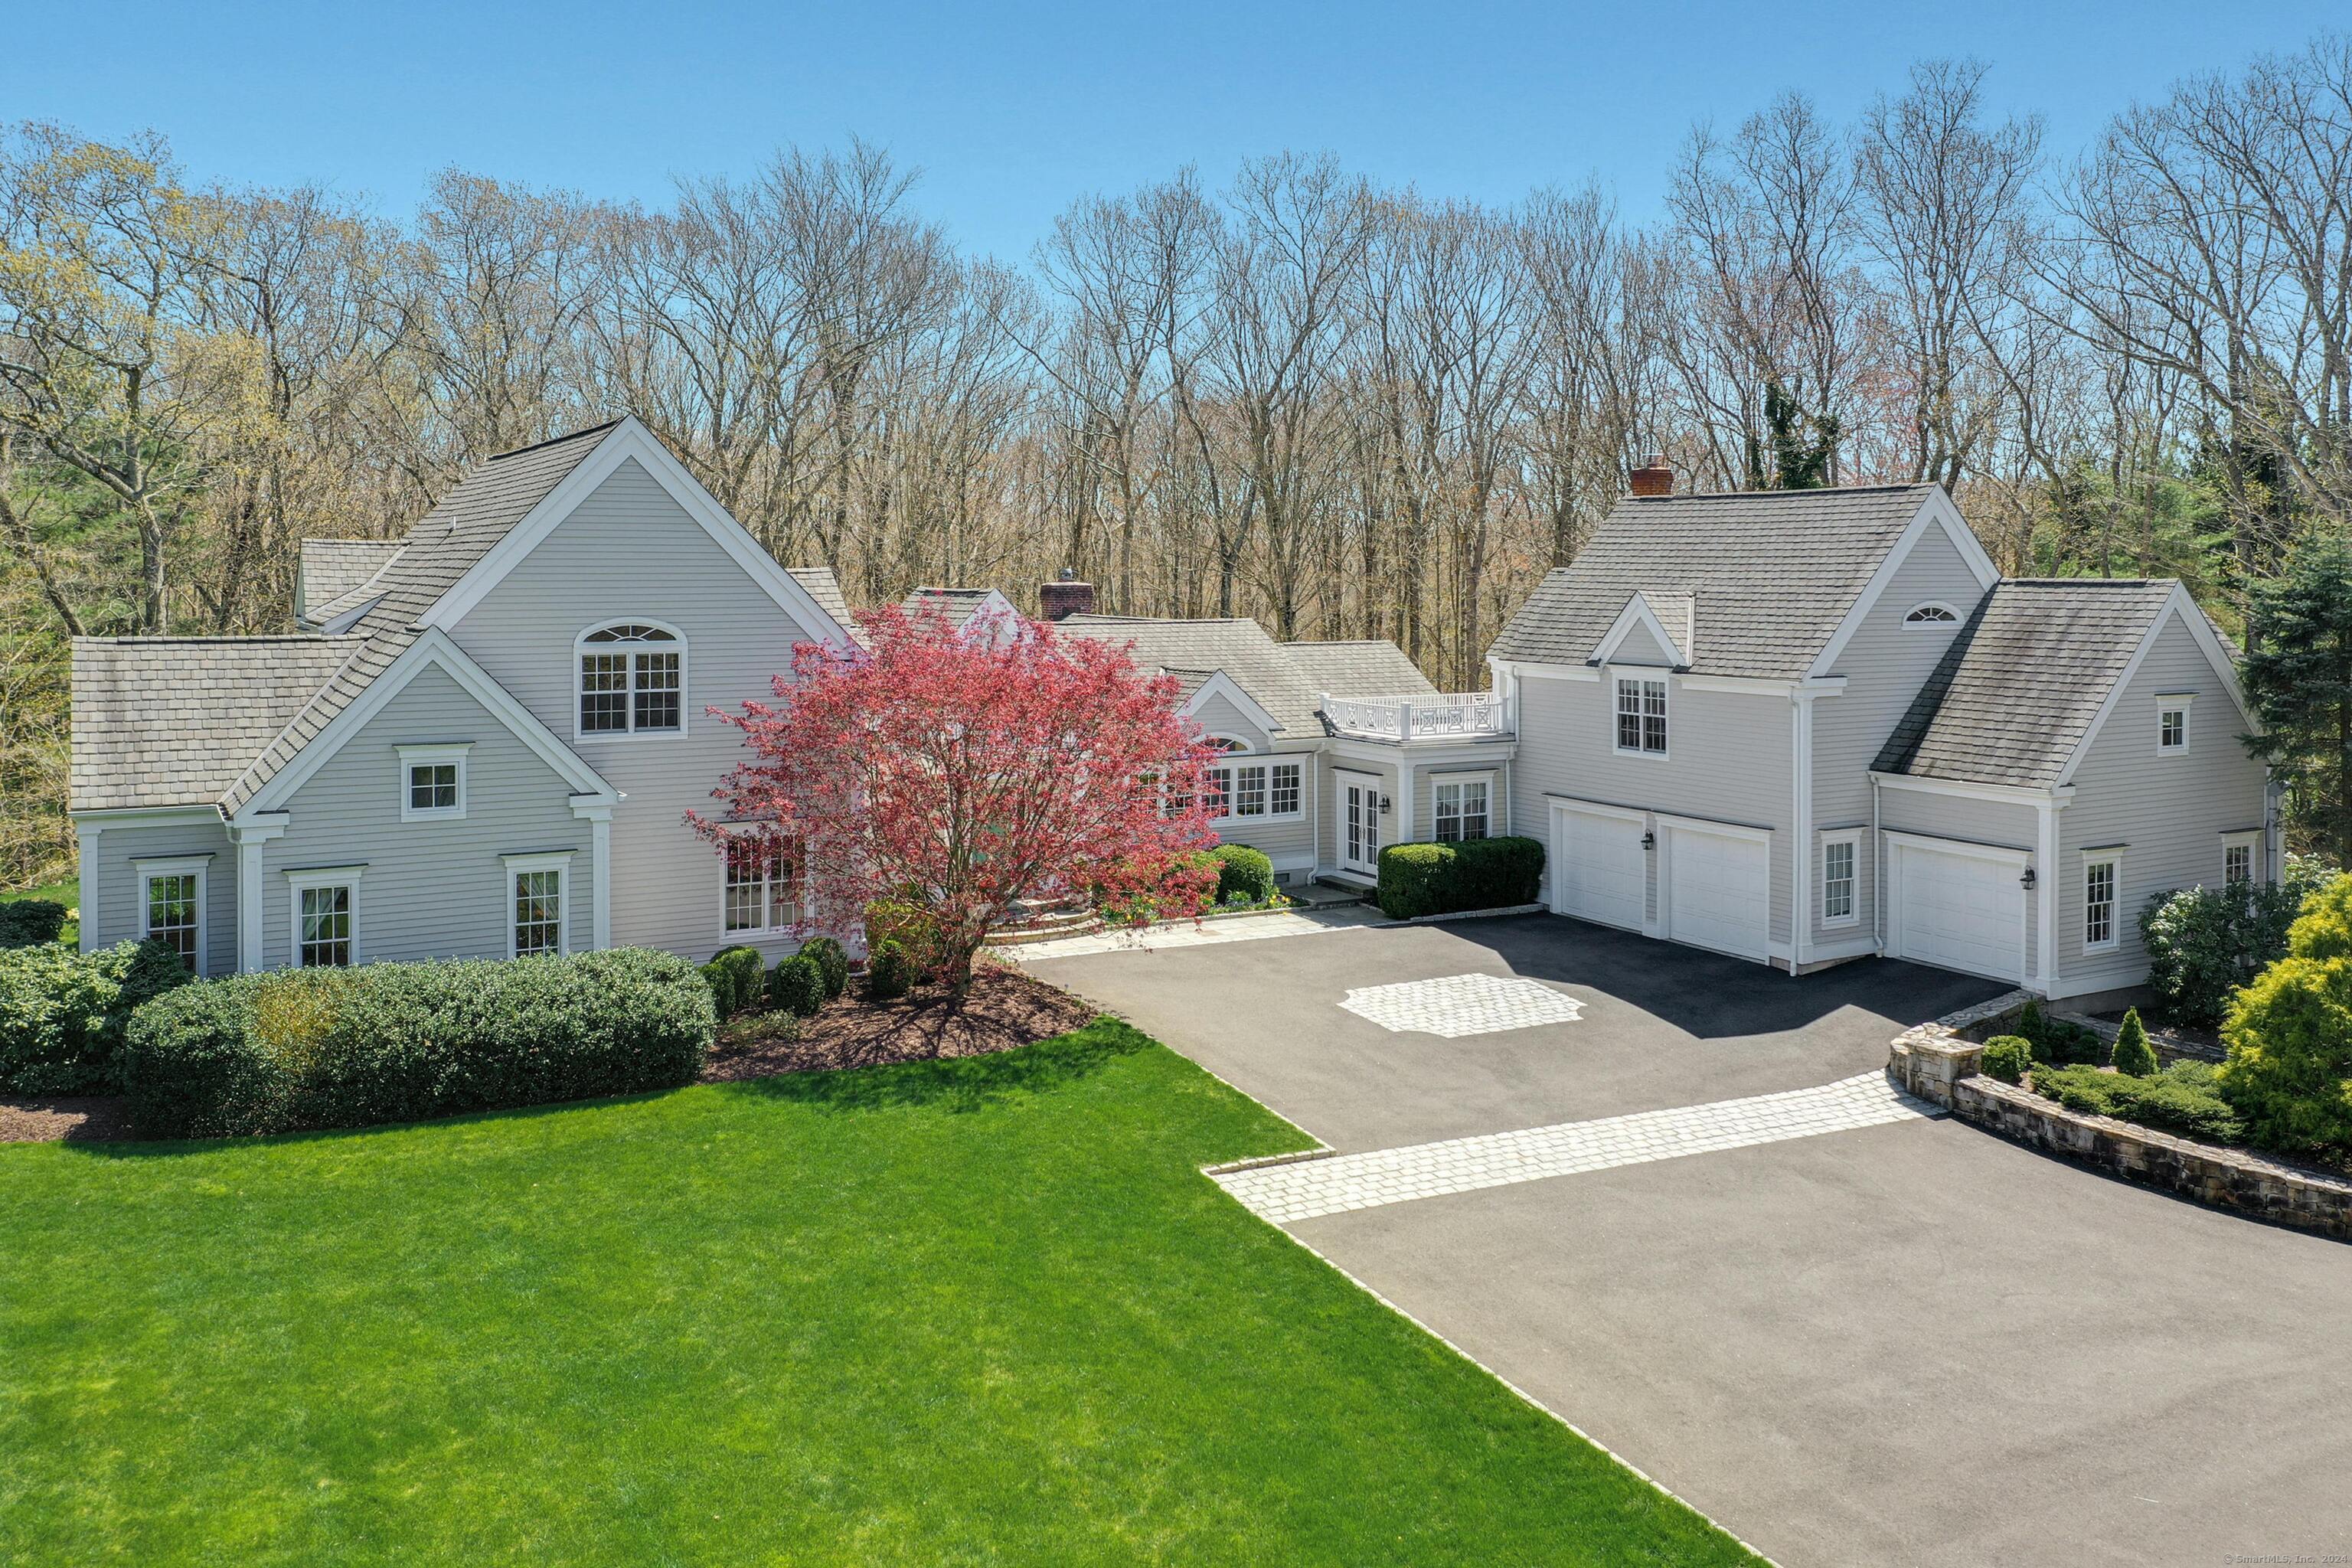 34 Louises Lane, New Canaan, Connecticut - 5 Bedrooms  
6 Bathrooms  
12 Rooms - 